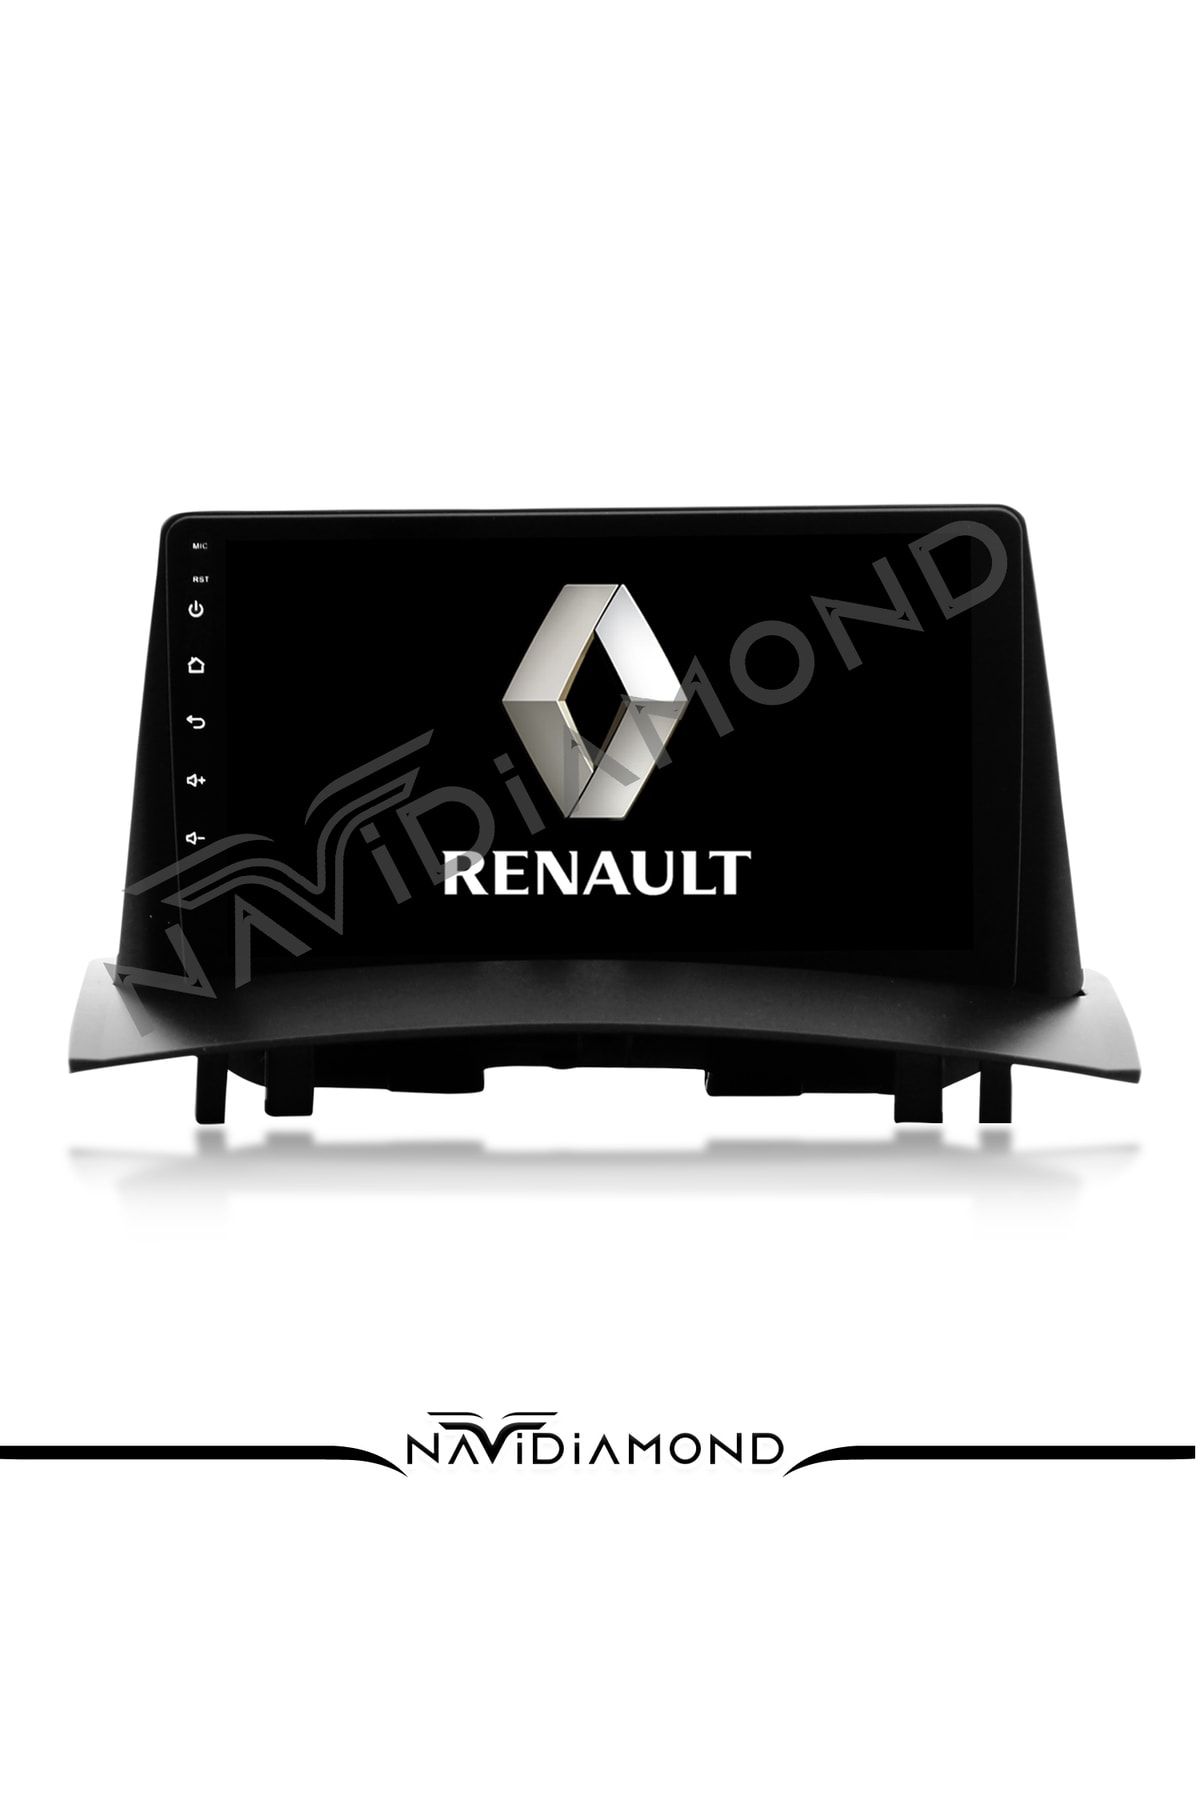 OEM Style Control Panel to Android Screen For RENAULT Megane 2